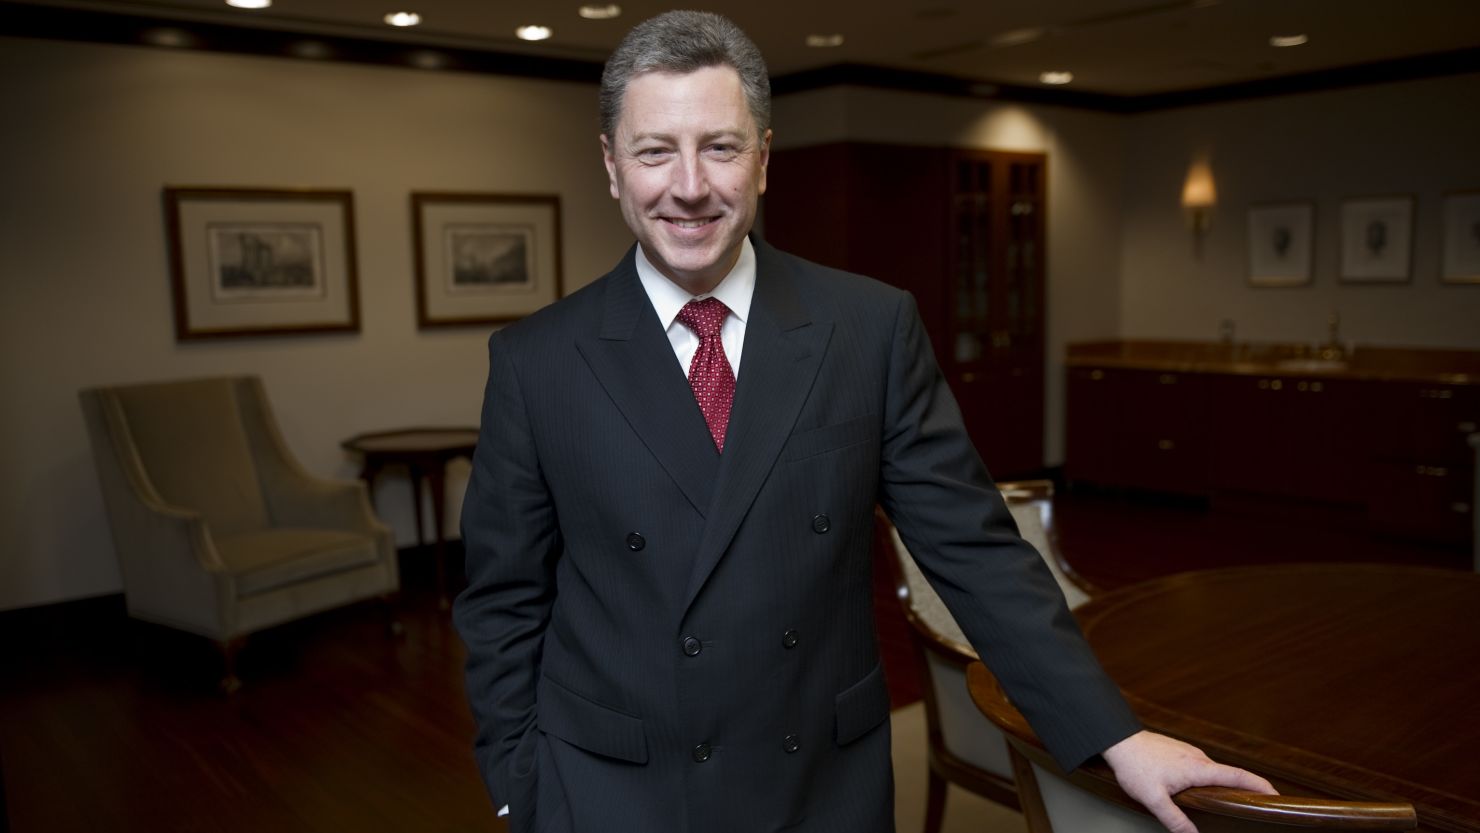 WASHINGTON, DC - May 19: Kurt Volker, former U.S. NATO ambassador, has been appointed  special representative for Ukraine by the State Department (Photo by Scott J. Ferrell/Congressional Quarterly/Getty Images)